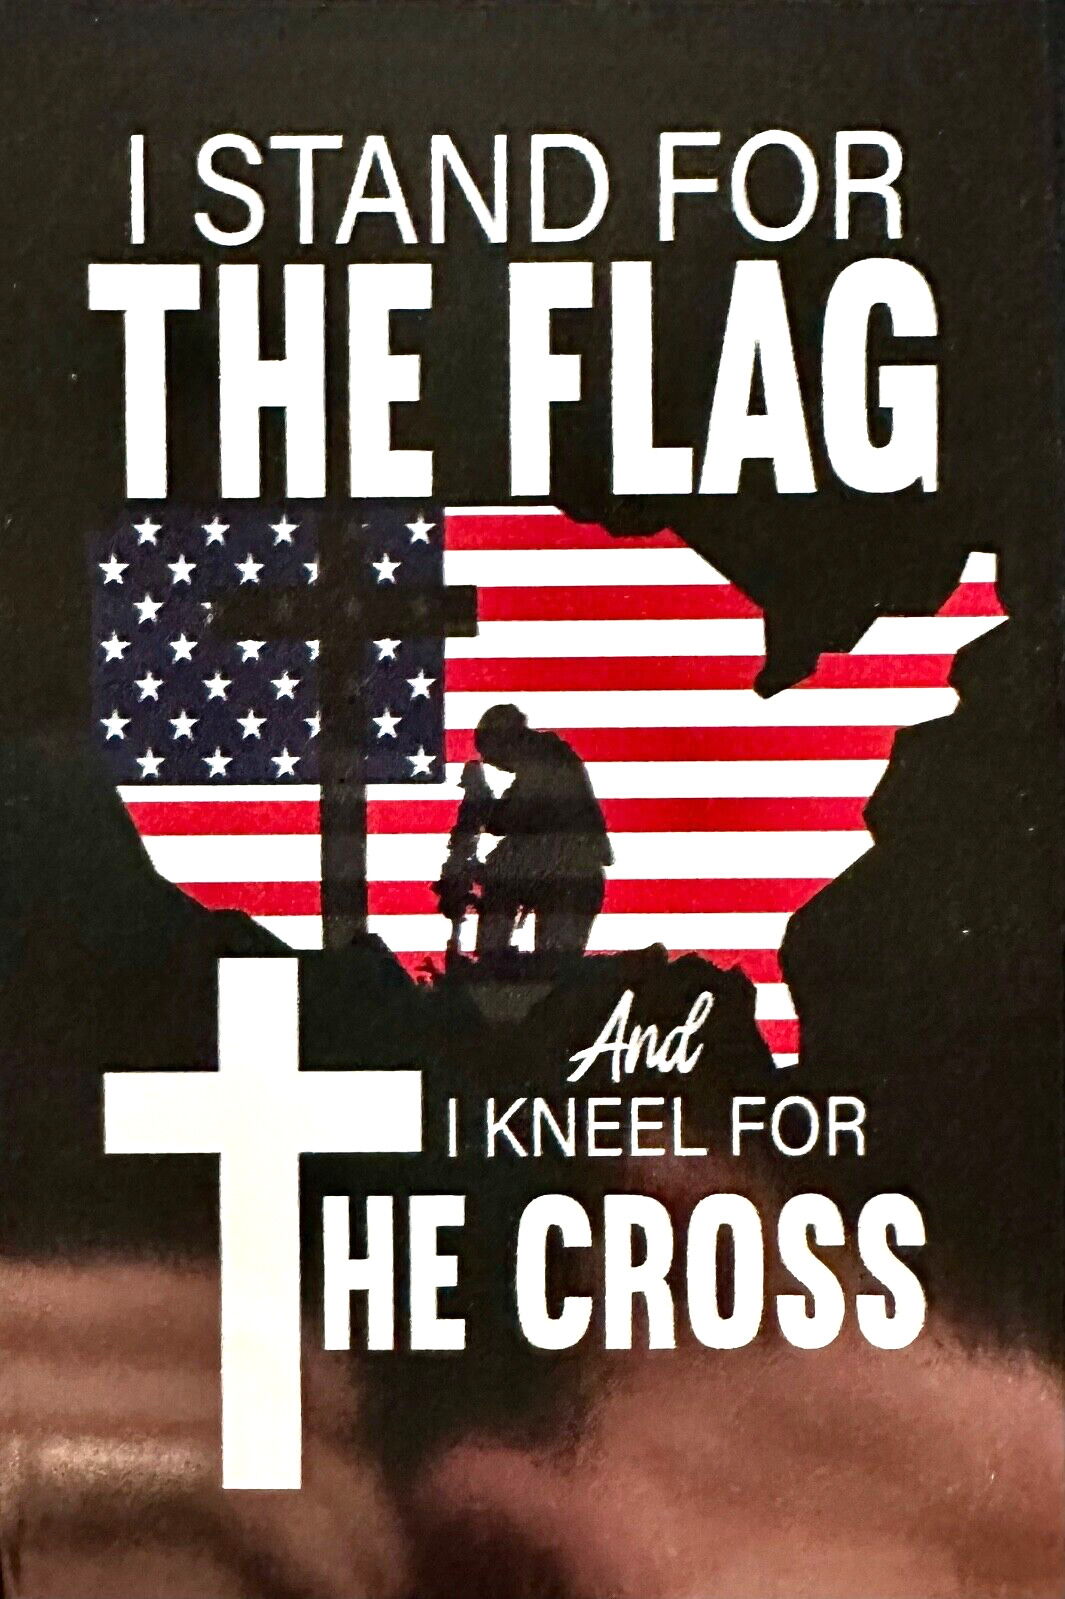 I Stand For The Flag & Kneel For the Cross.. Truck Decals Sticker  (4 Pack) #260